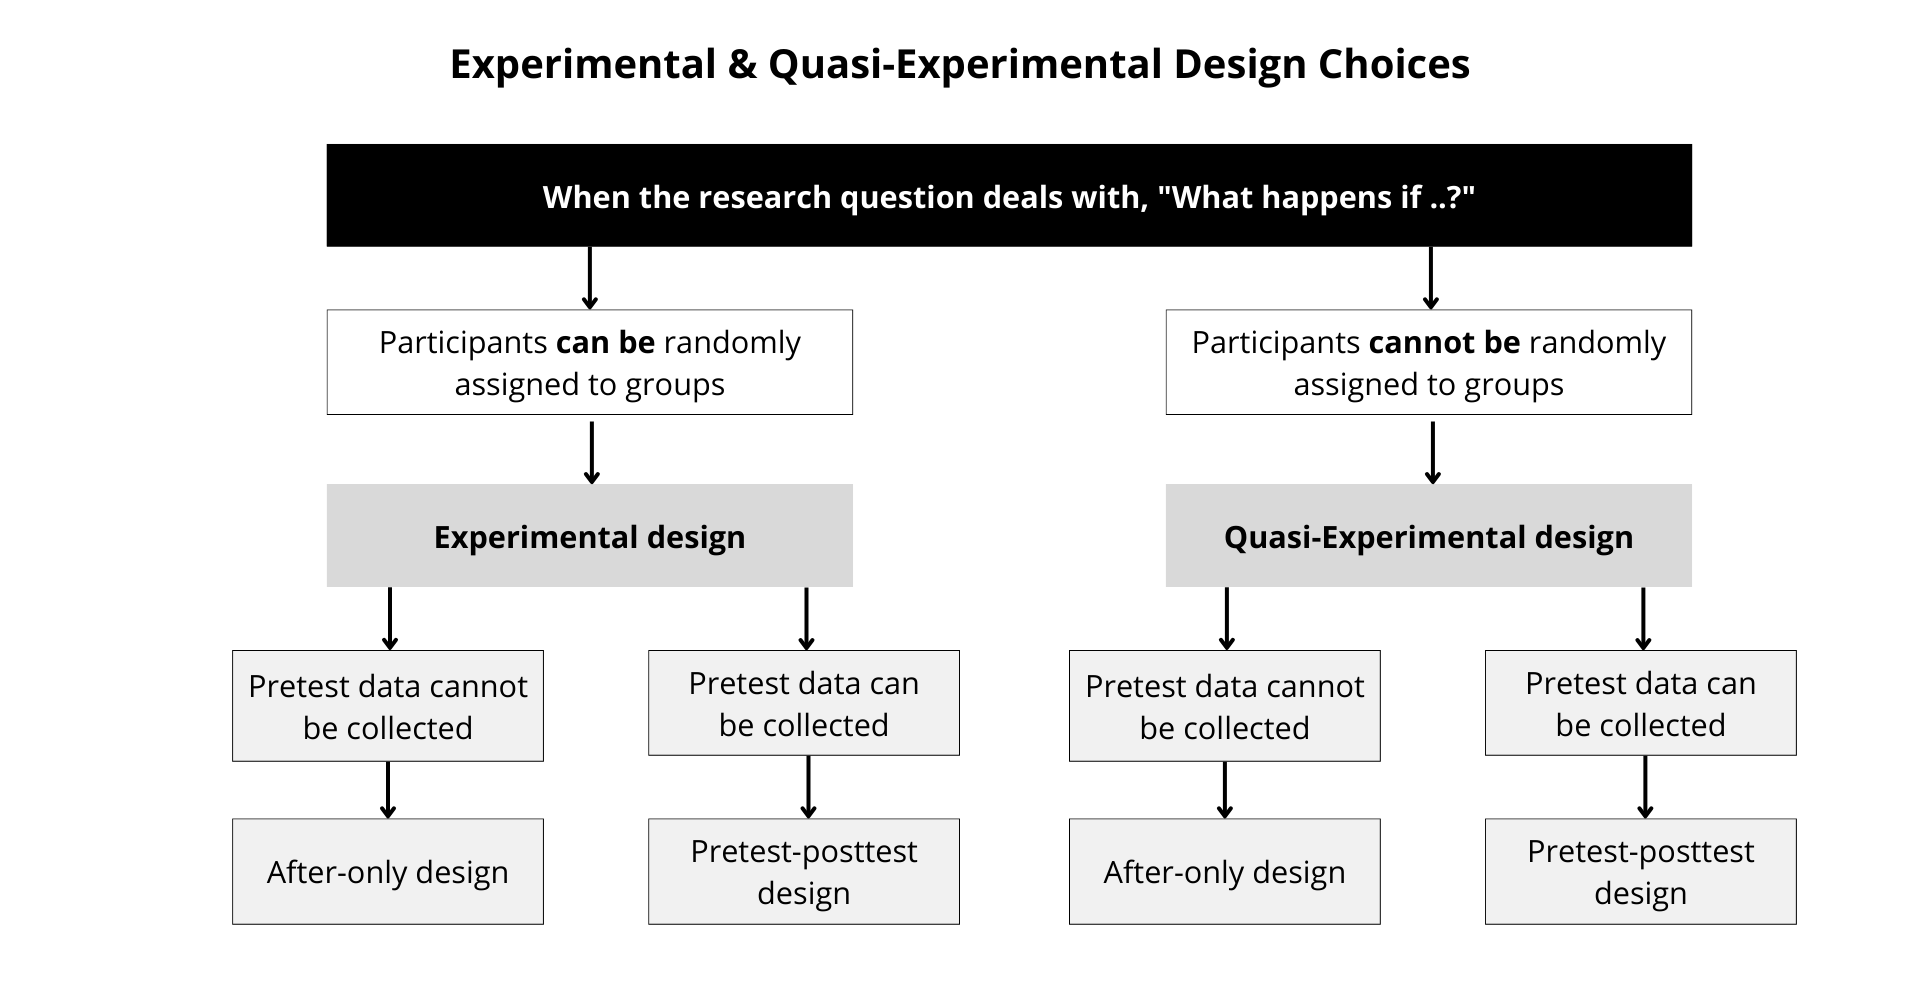 Figure 10. Experimental & Quasi-Experimental Design Choices. Copyright 2018. Elsevier Canada, a division of Reed Elsevier Canada Ltd.